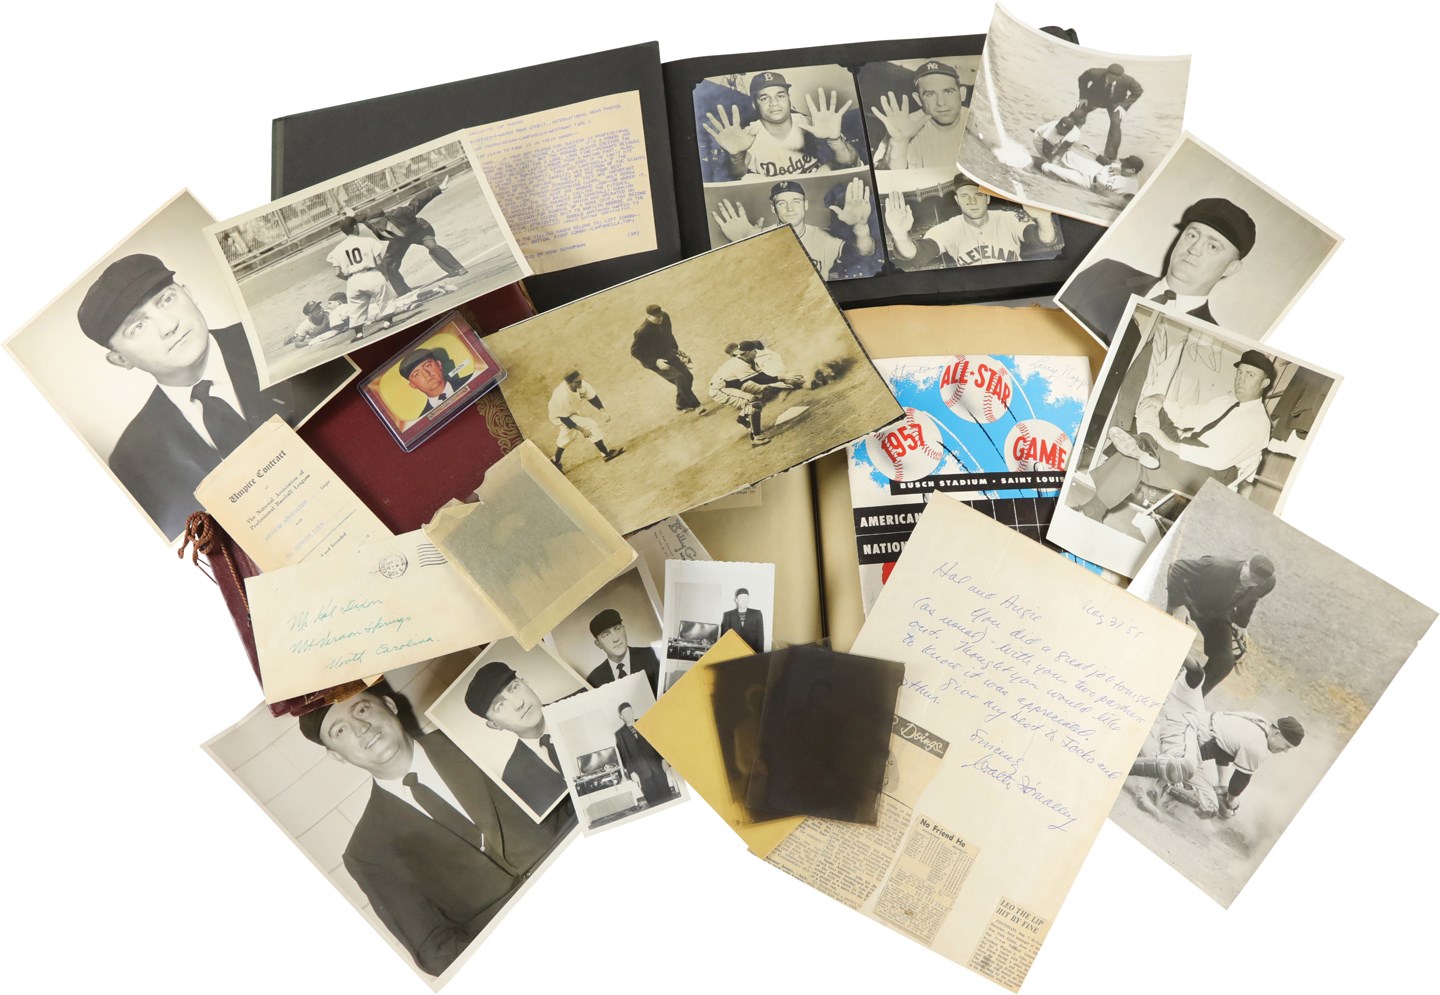 Baseball Memorabilia - Umpire Hal Dixon Personal Effects Collection with Contracts, Photographs, Autographs and More